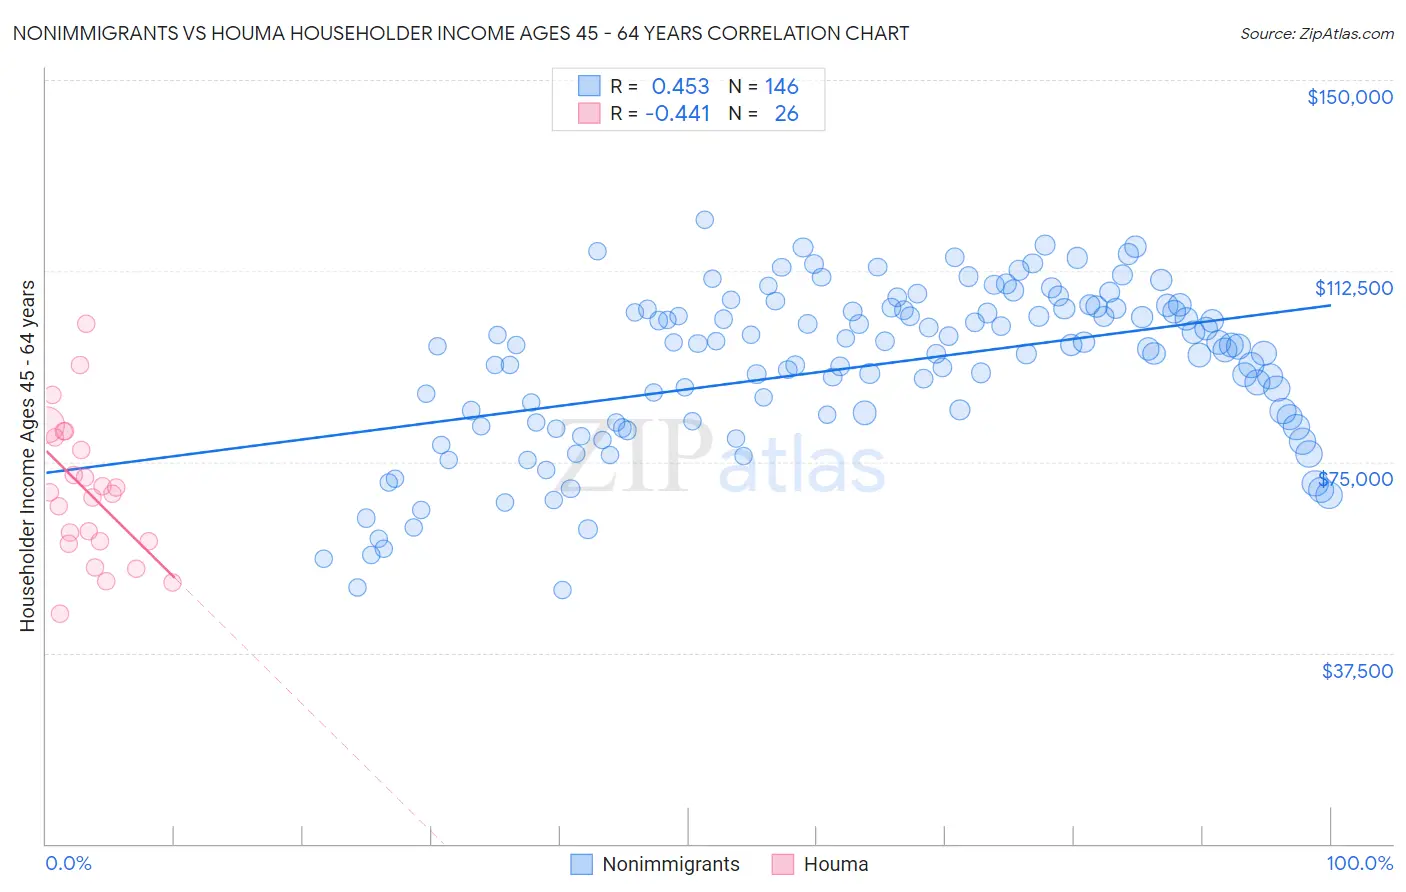 Nonimmigrants vs Houma Householder Income Ages 45 - 64 years